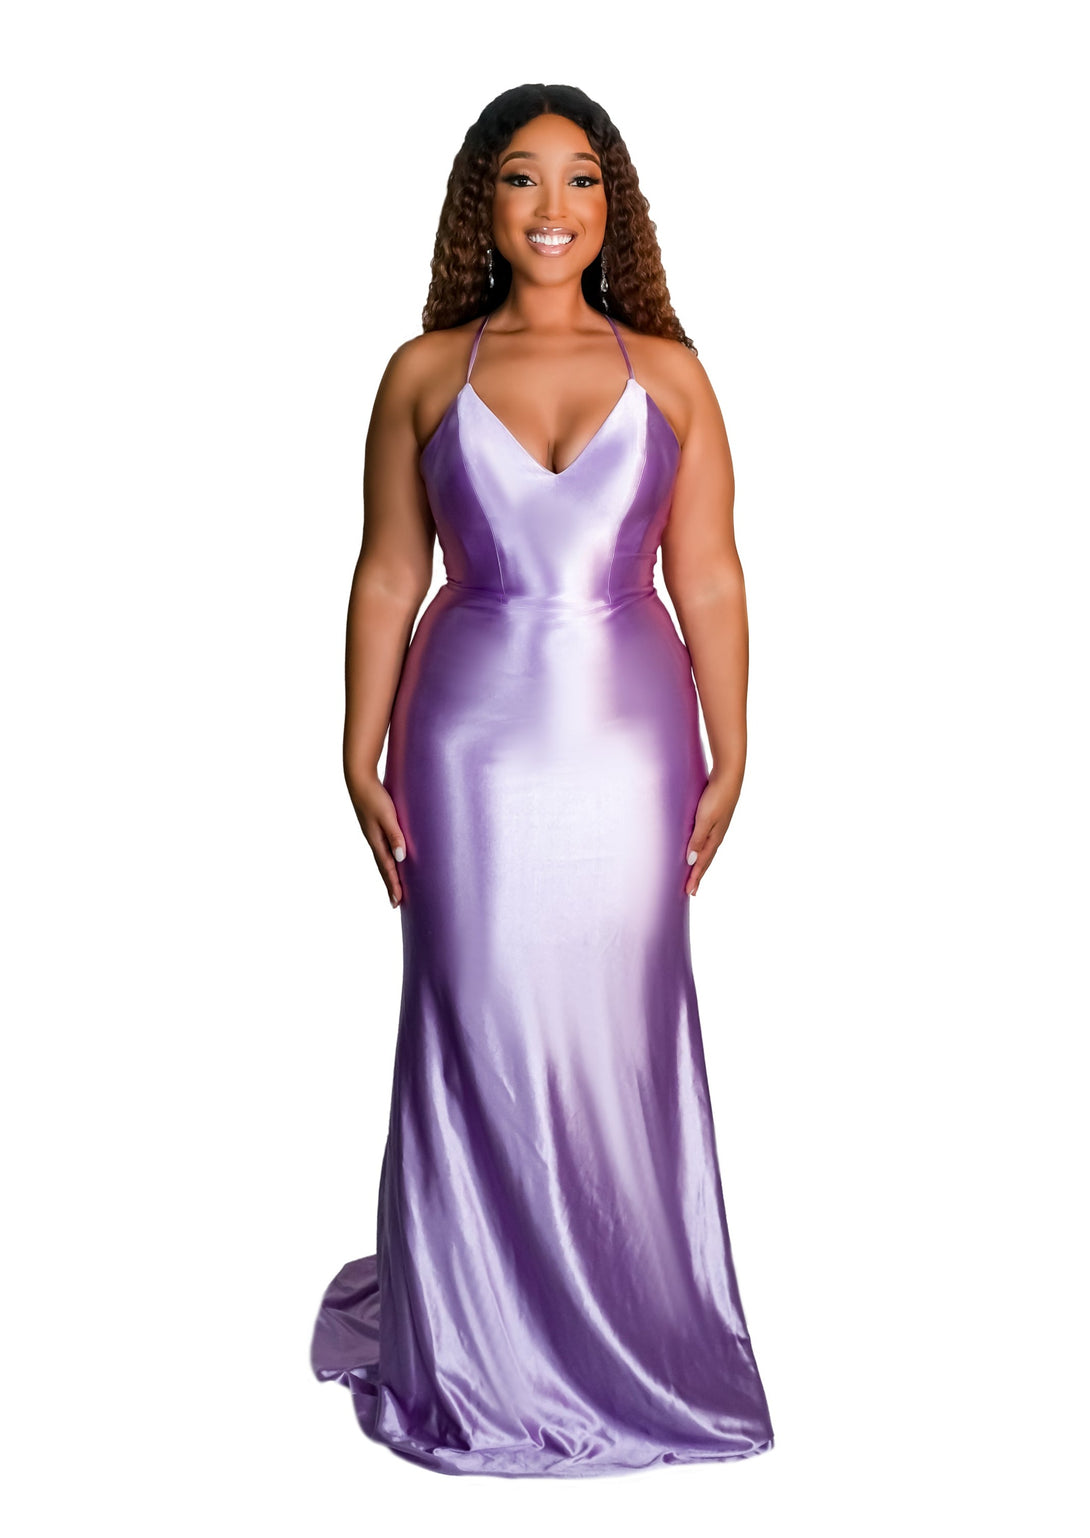 Plus size black bridesmaid wearing a fitted spaghetti strap v-neck bridesmaid dress with stretch to flaunt curves